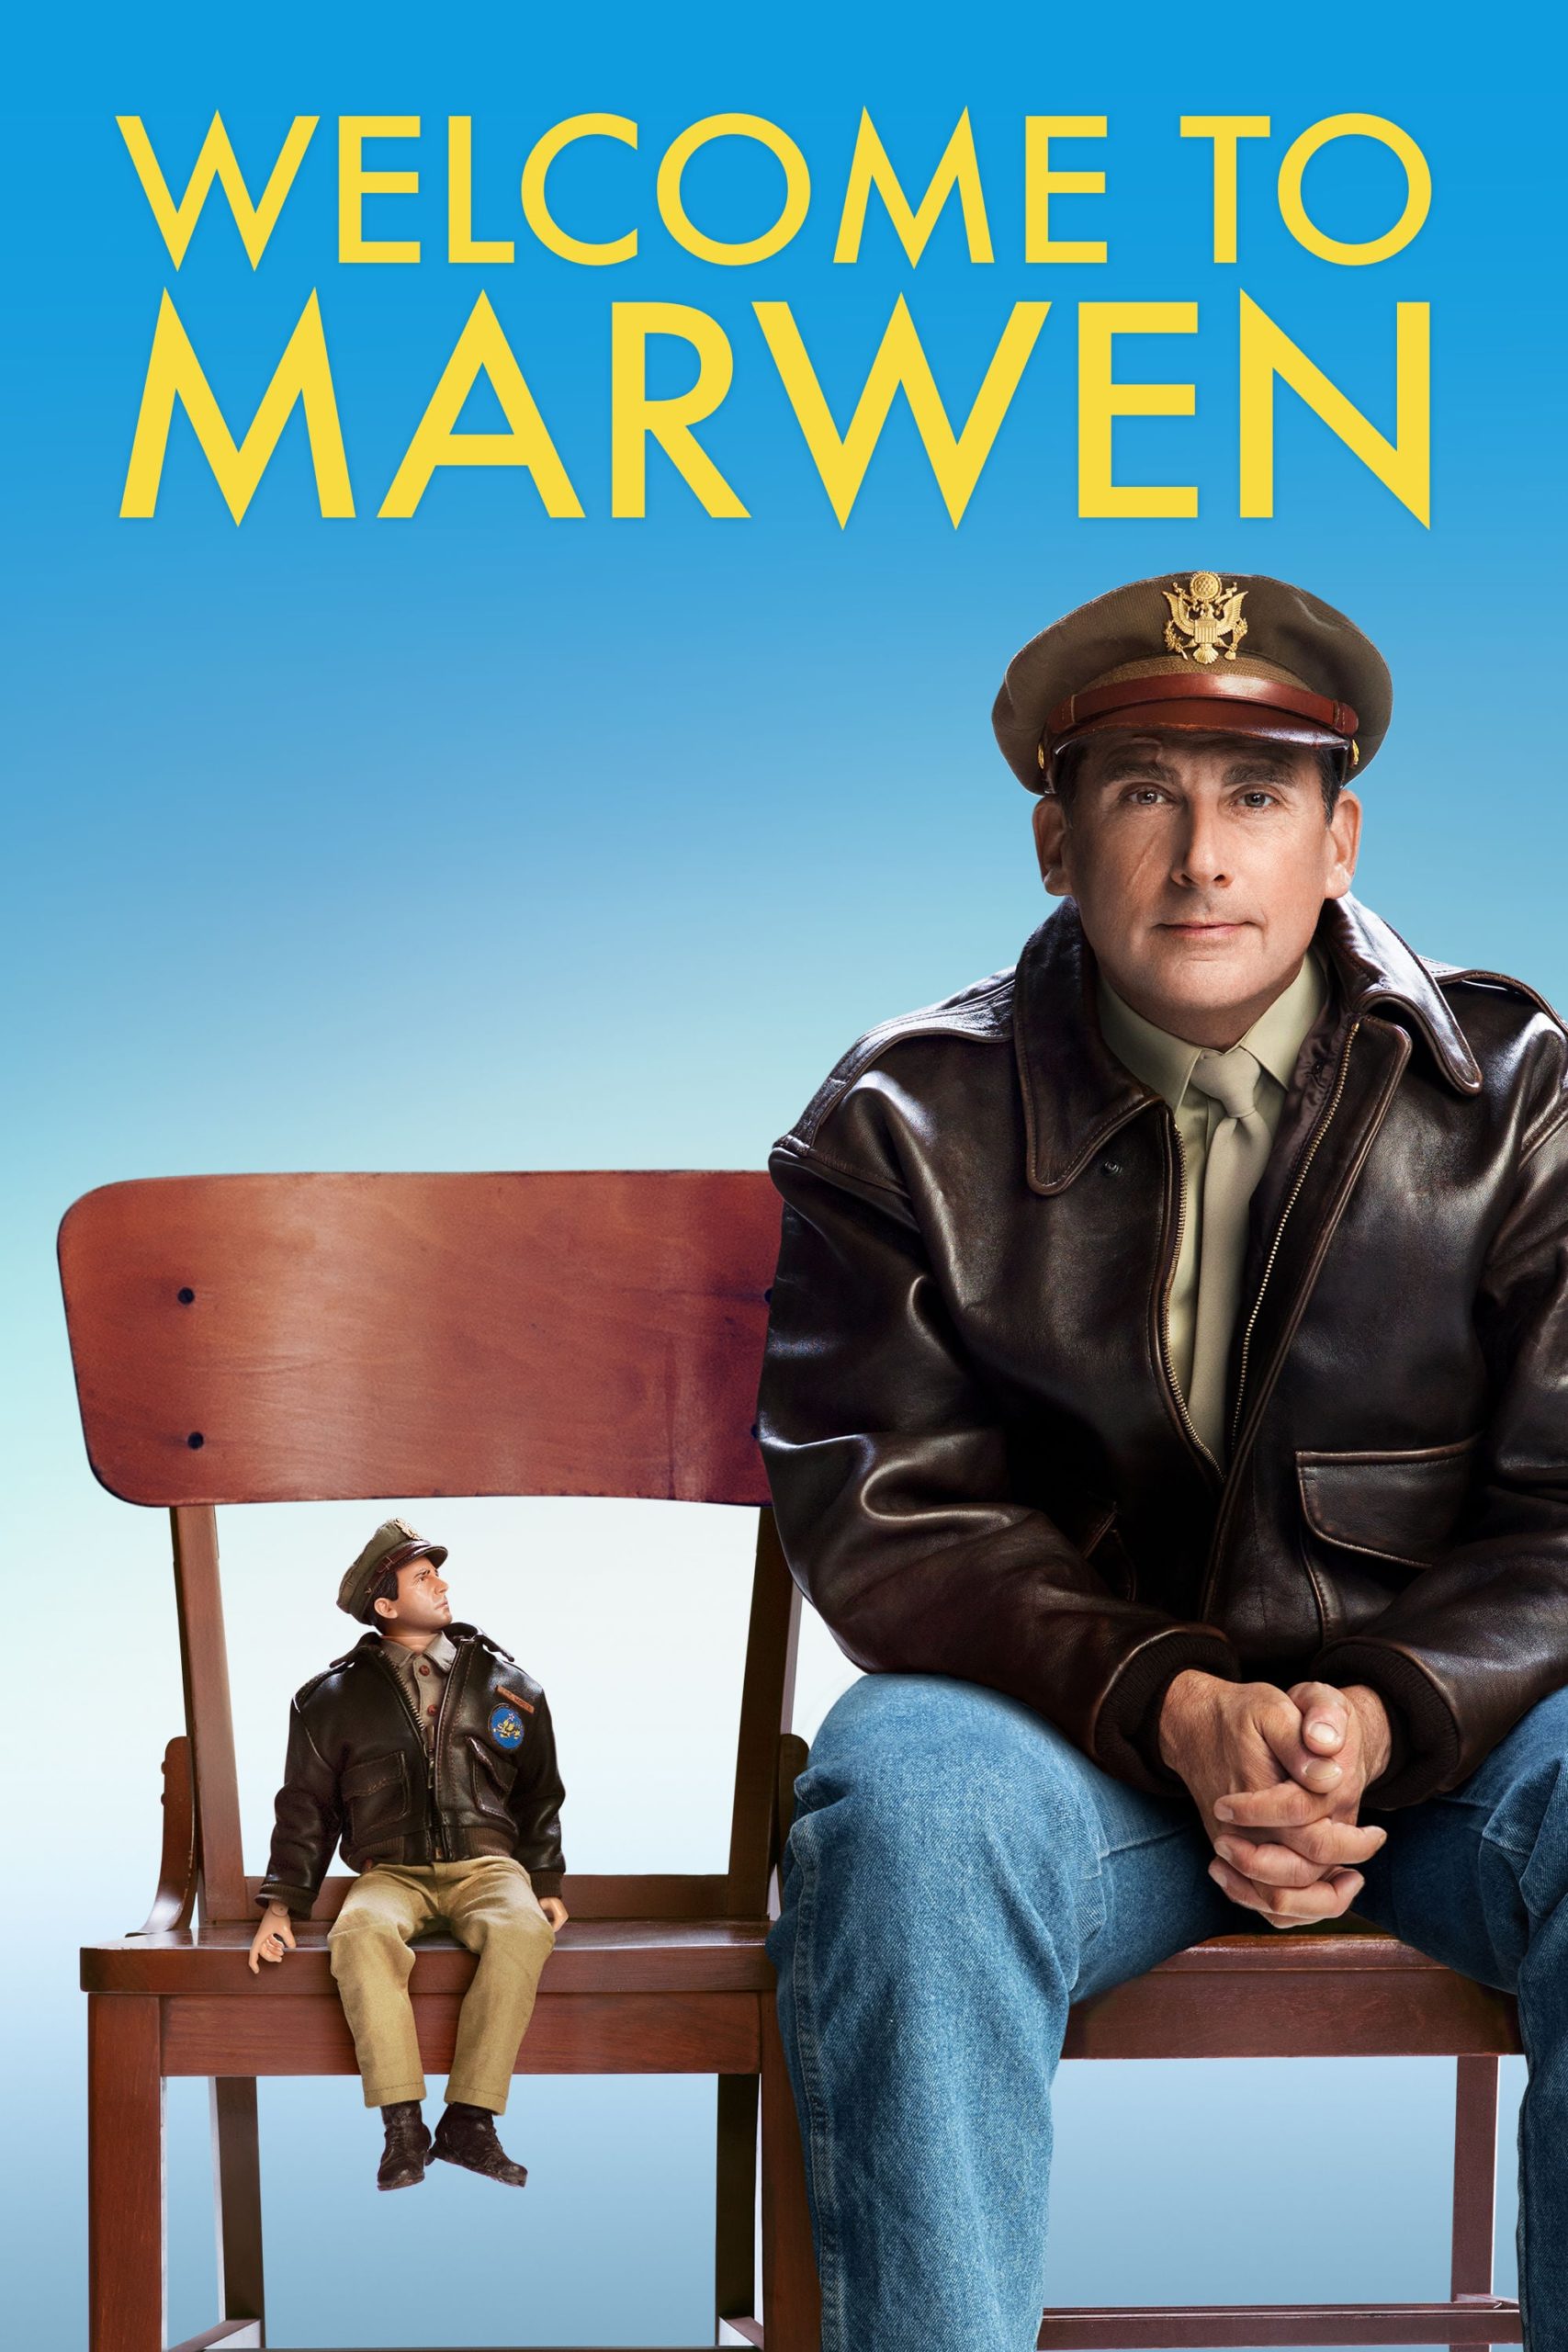 Poster for the movie "Welcome to Marwen"